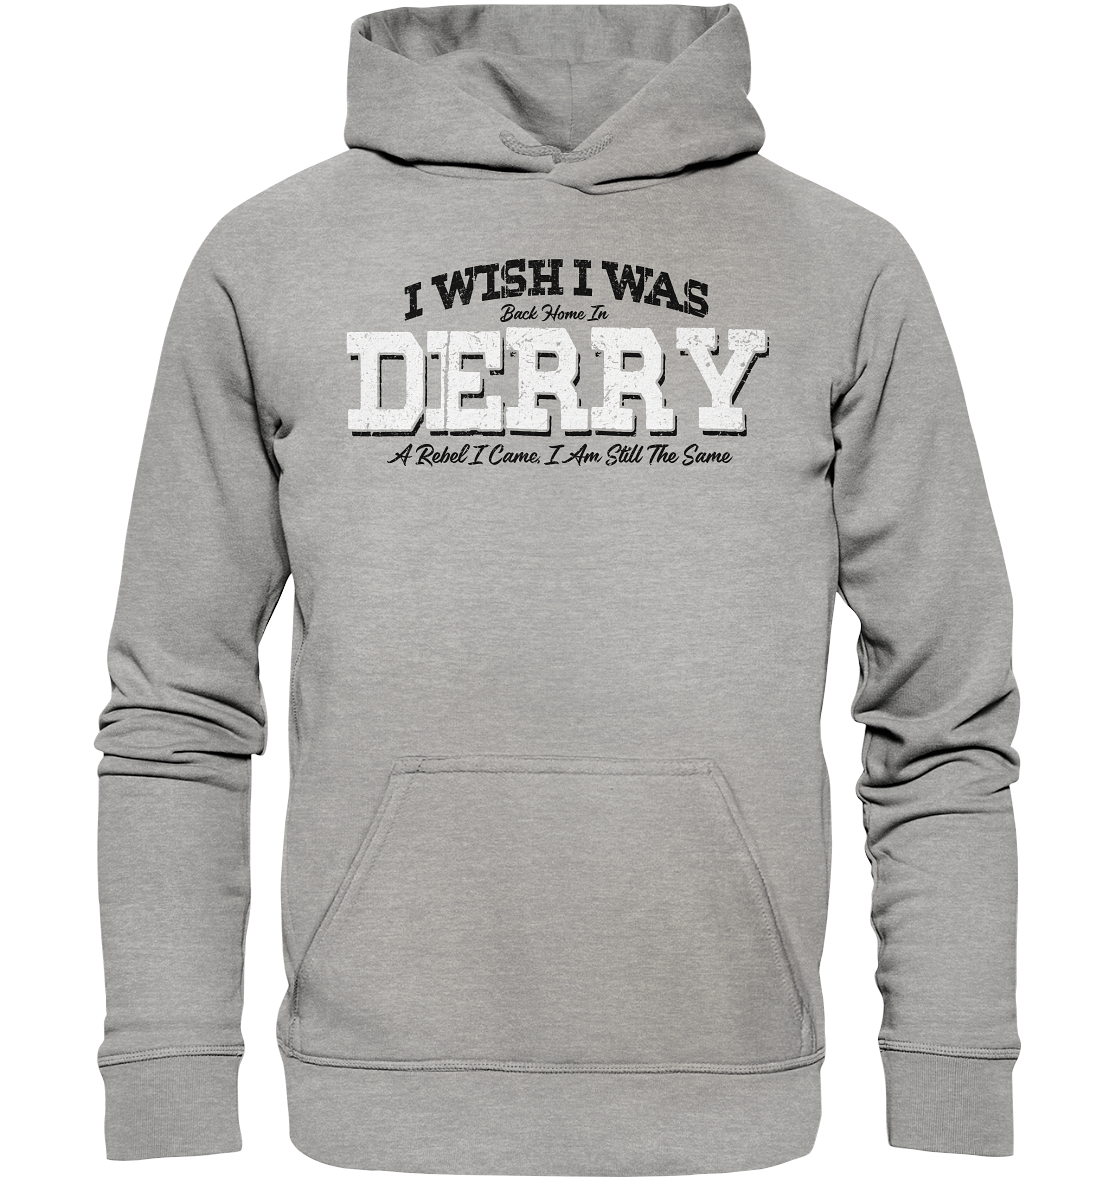 I Wish I Was Back Home In Derry - Basic Unisex Hoodie